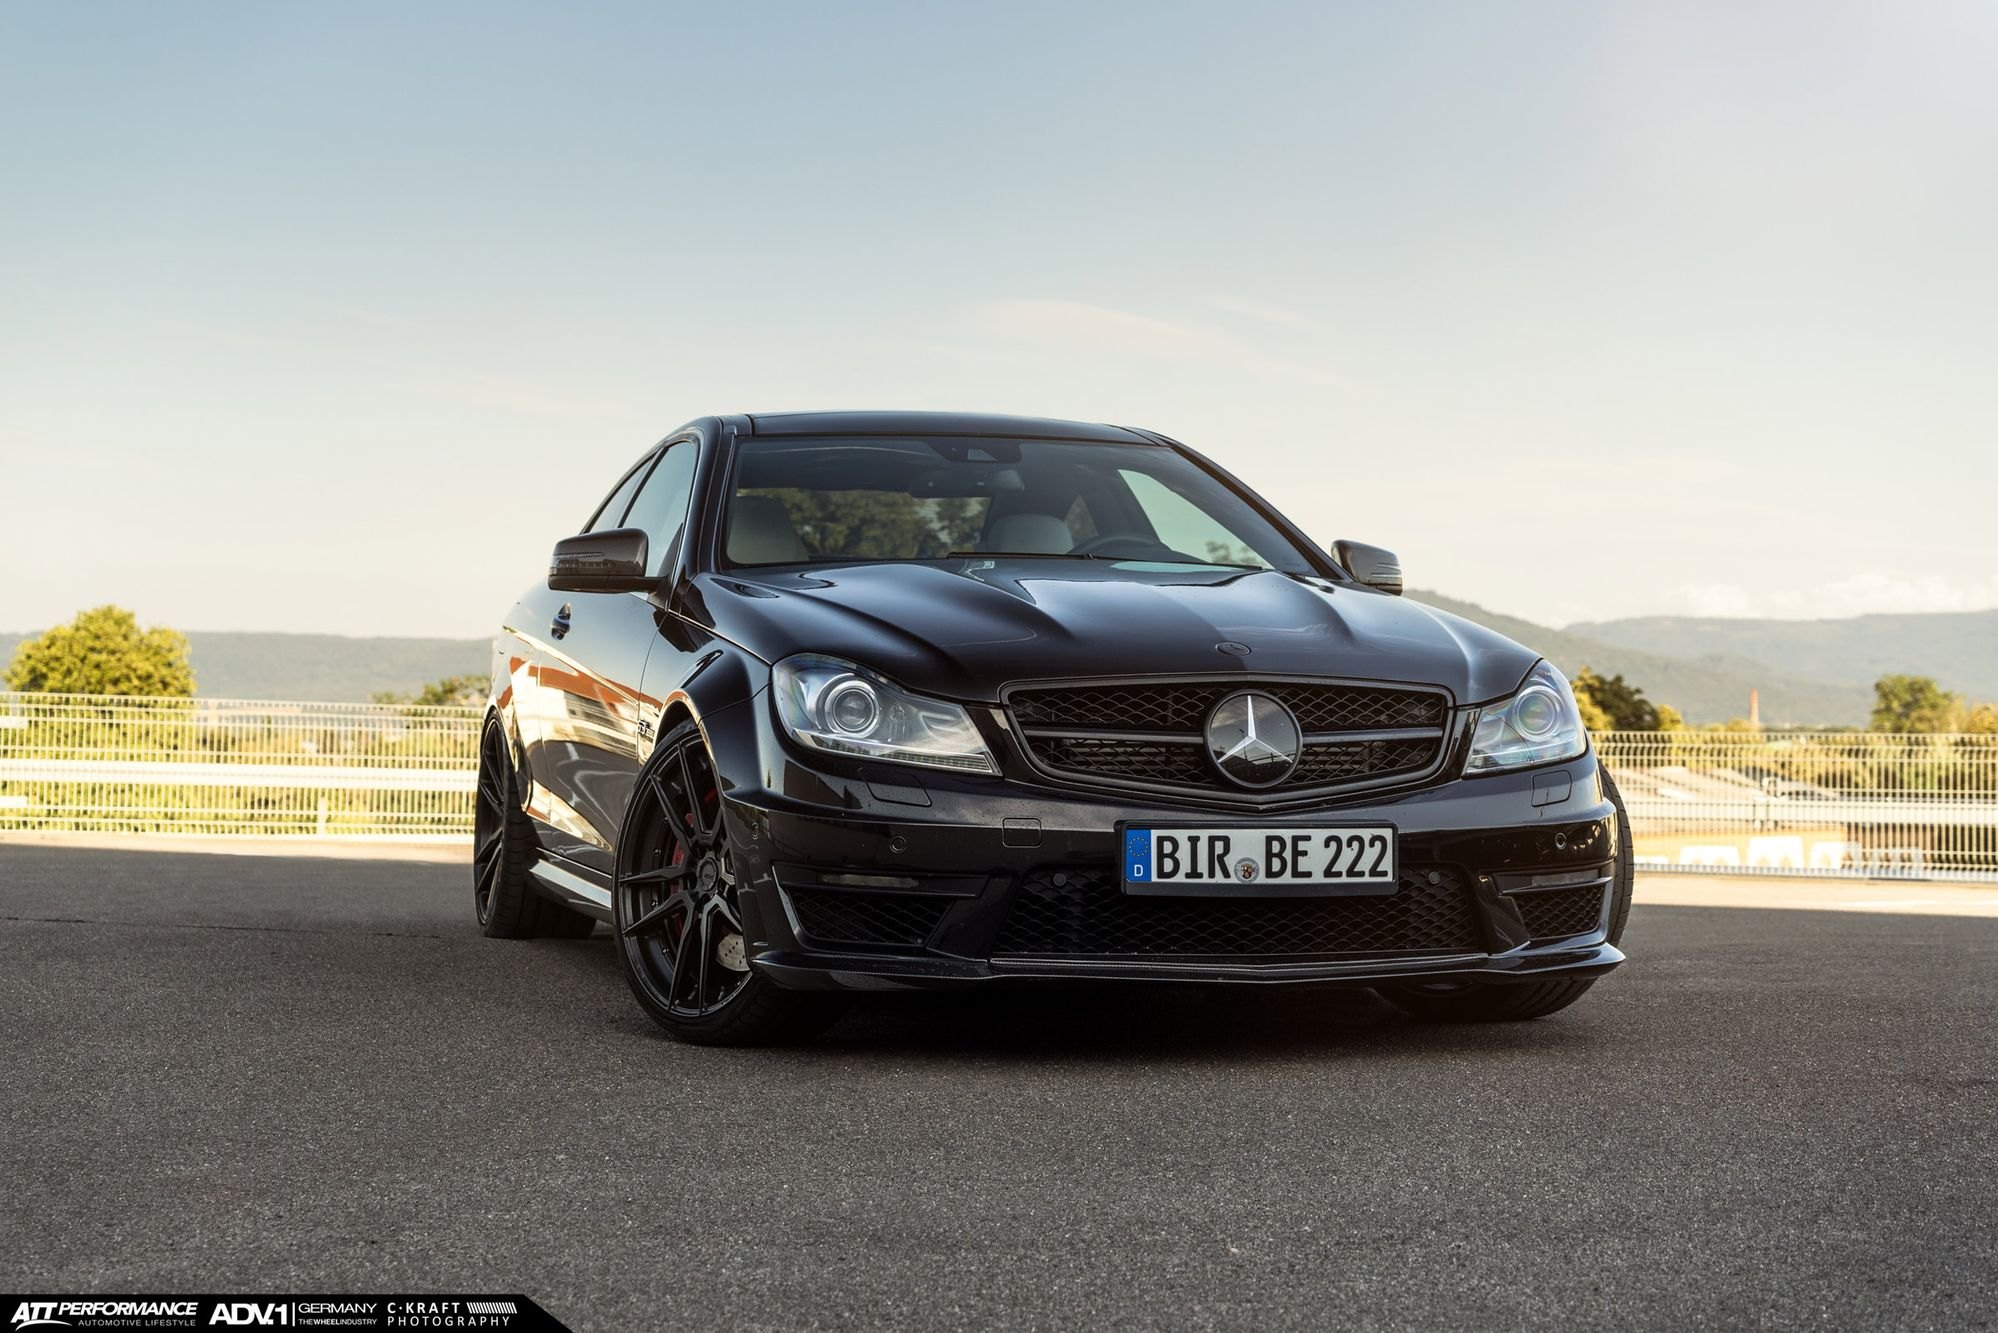 Perfect Mix of Design and Performance - C63AMG Coupe - Photo by ADV.1